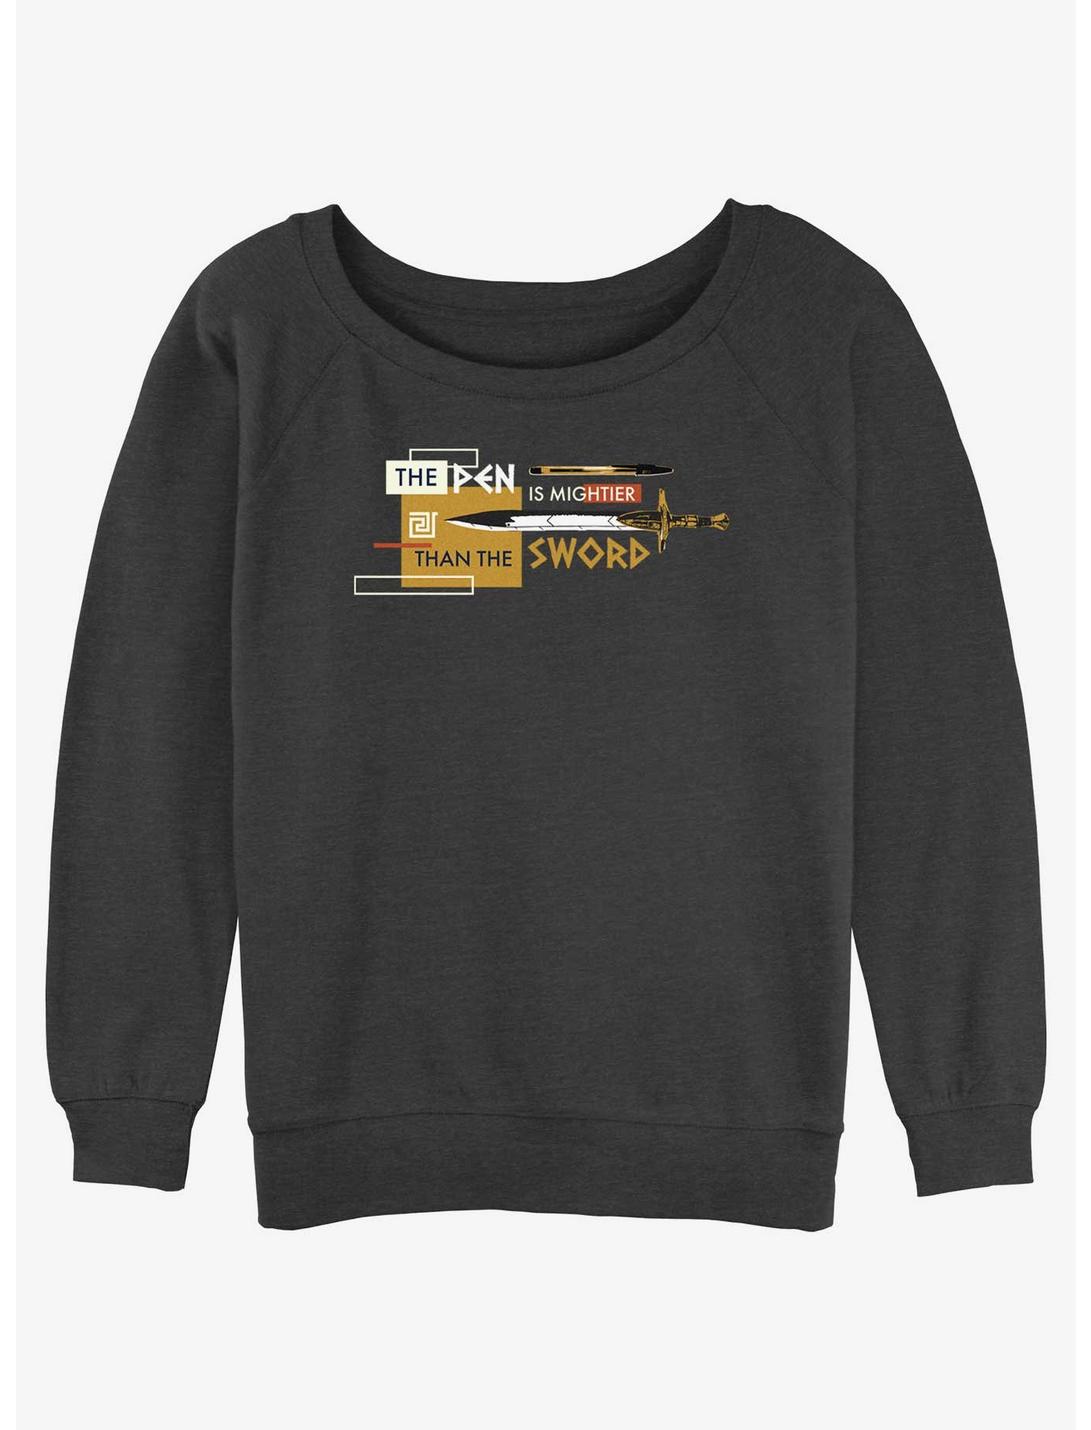 Disney Percy Jackson And The Olympians The Pen Is Mightier Than The Sword Girls Slouchy Sweatshirt, CHAR HTR, hi-res